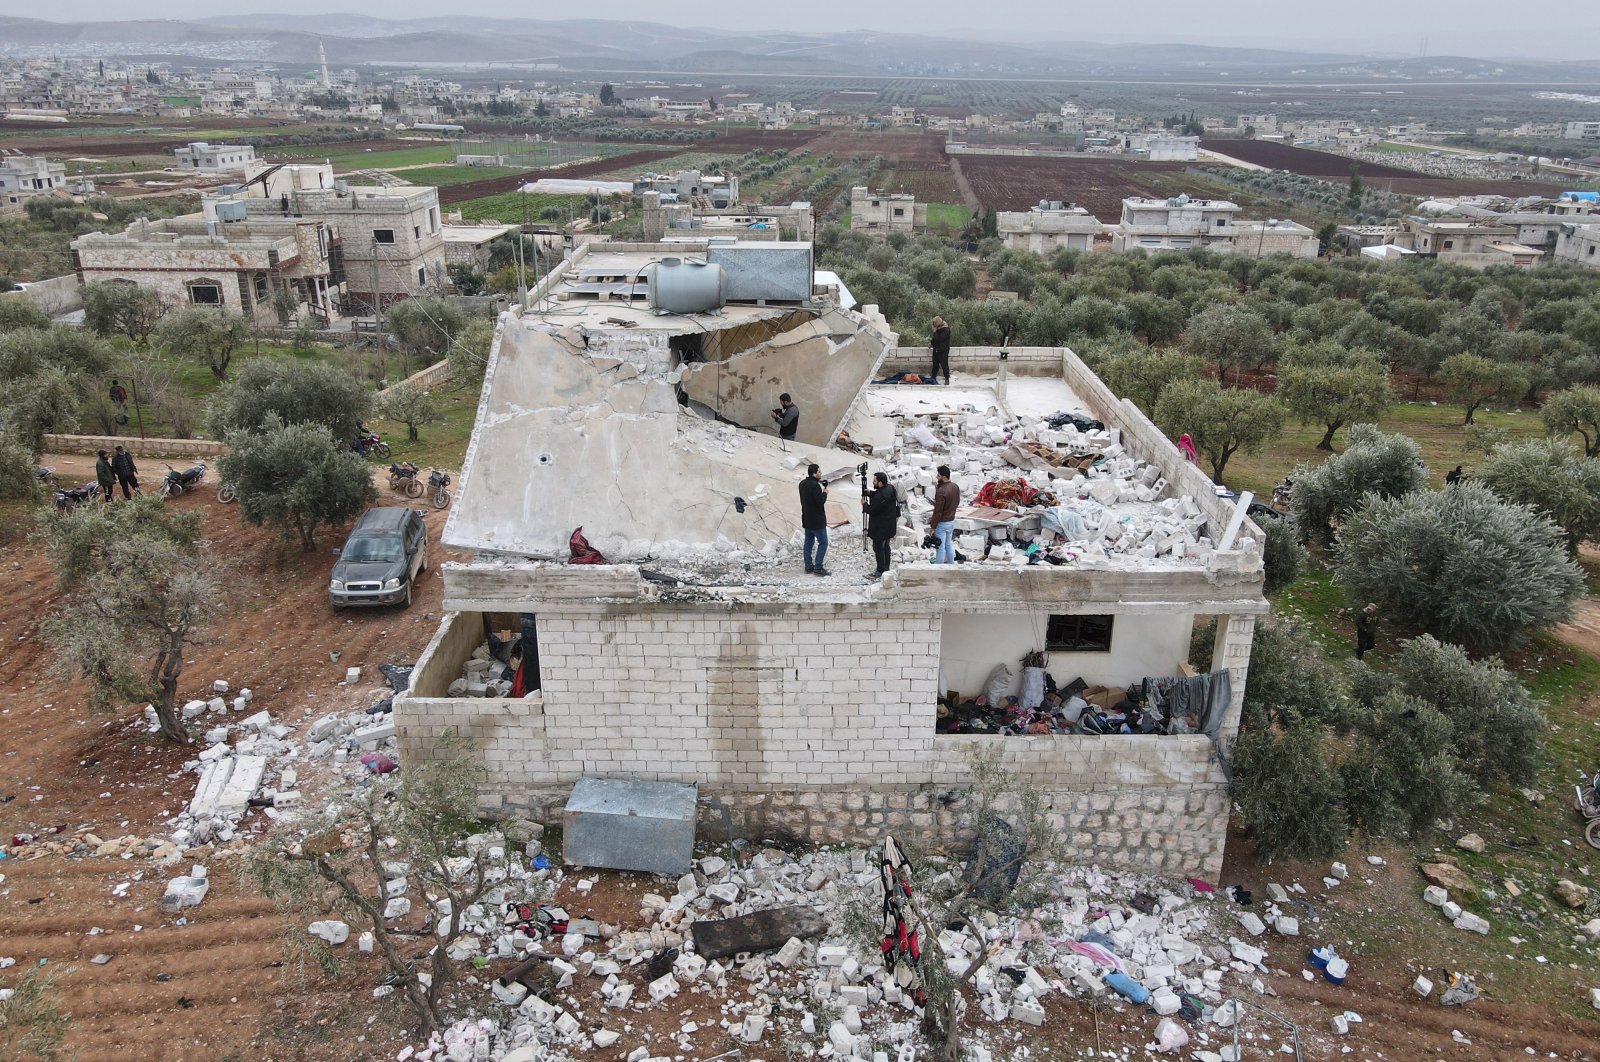 An aerial picture taken by a drone shows people inspecting a damaged building after an alleged counterterrorism operation by U.S. special forces in the early morning in the northern countryside of Idlib, Syria, Feb. 3, 2022. (EPA Photo)